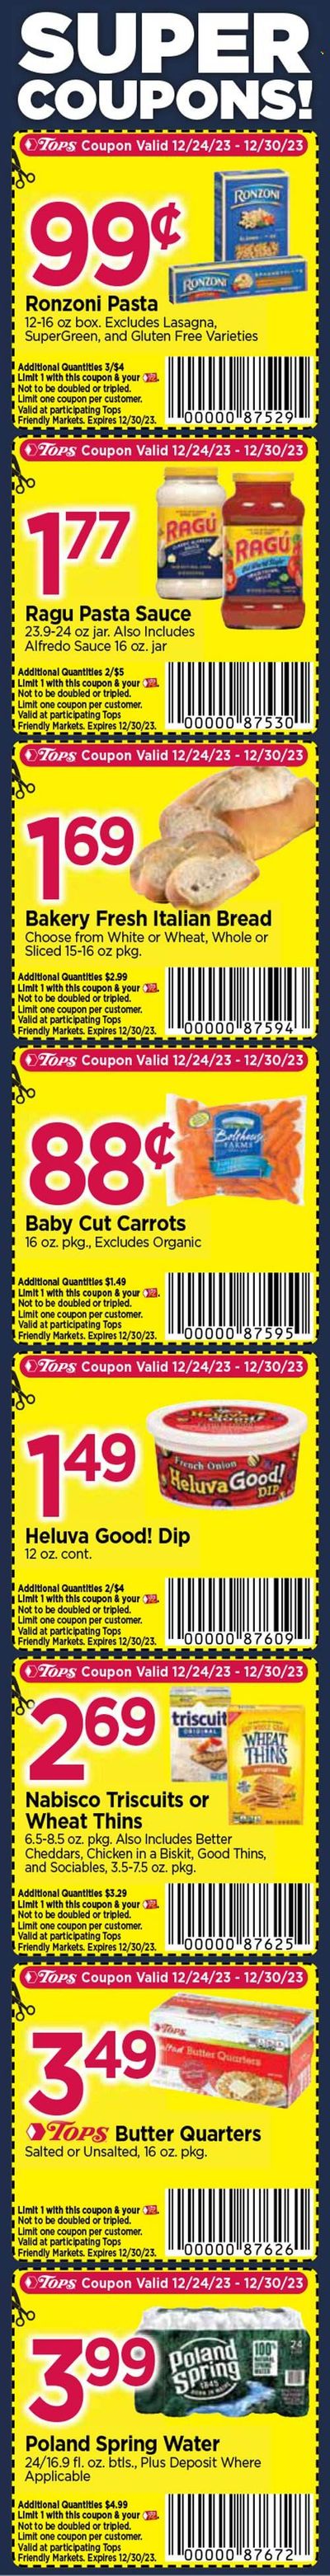 Tops Weekly Ad Flyer Specials December 24 to December 30, 2023